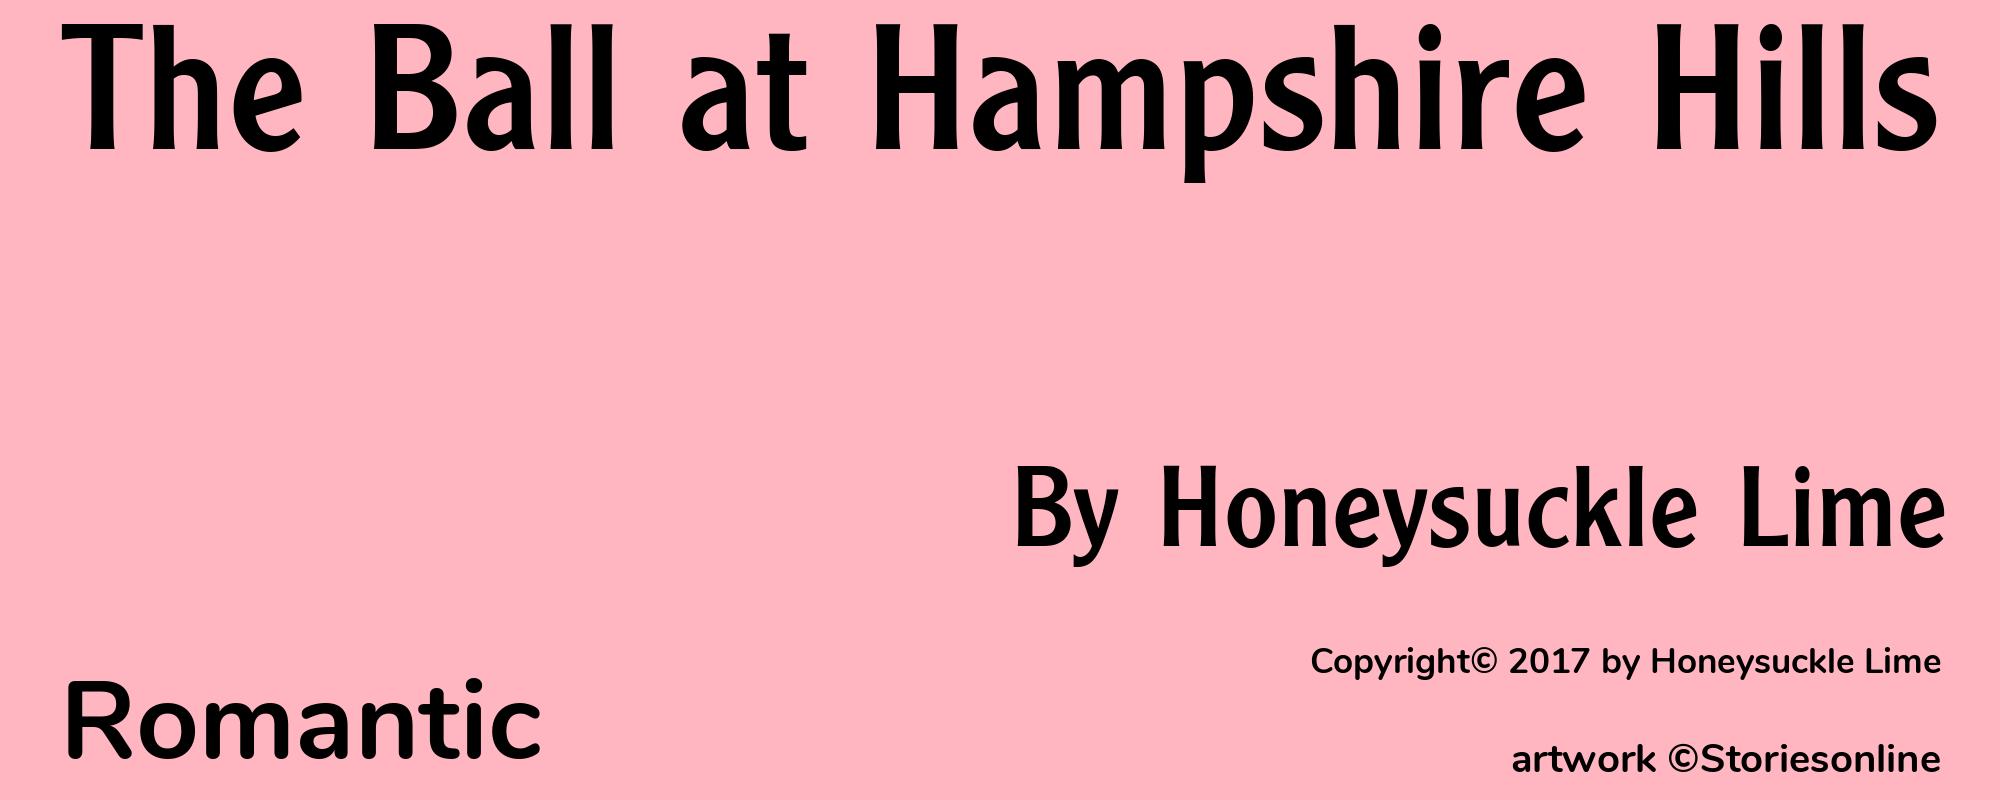 The Ball at Hampshire Hills - Cover